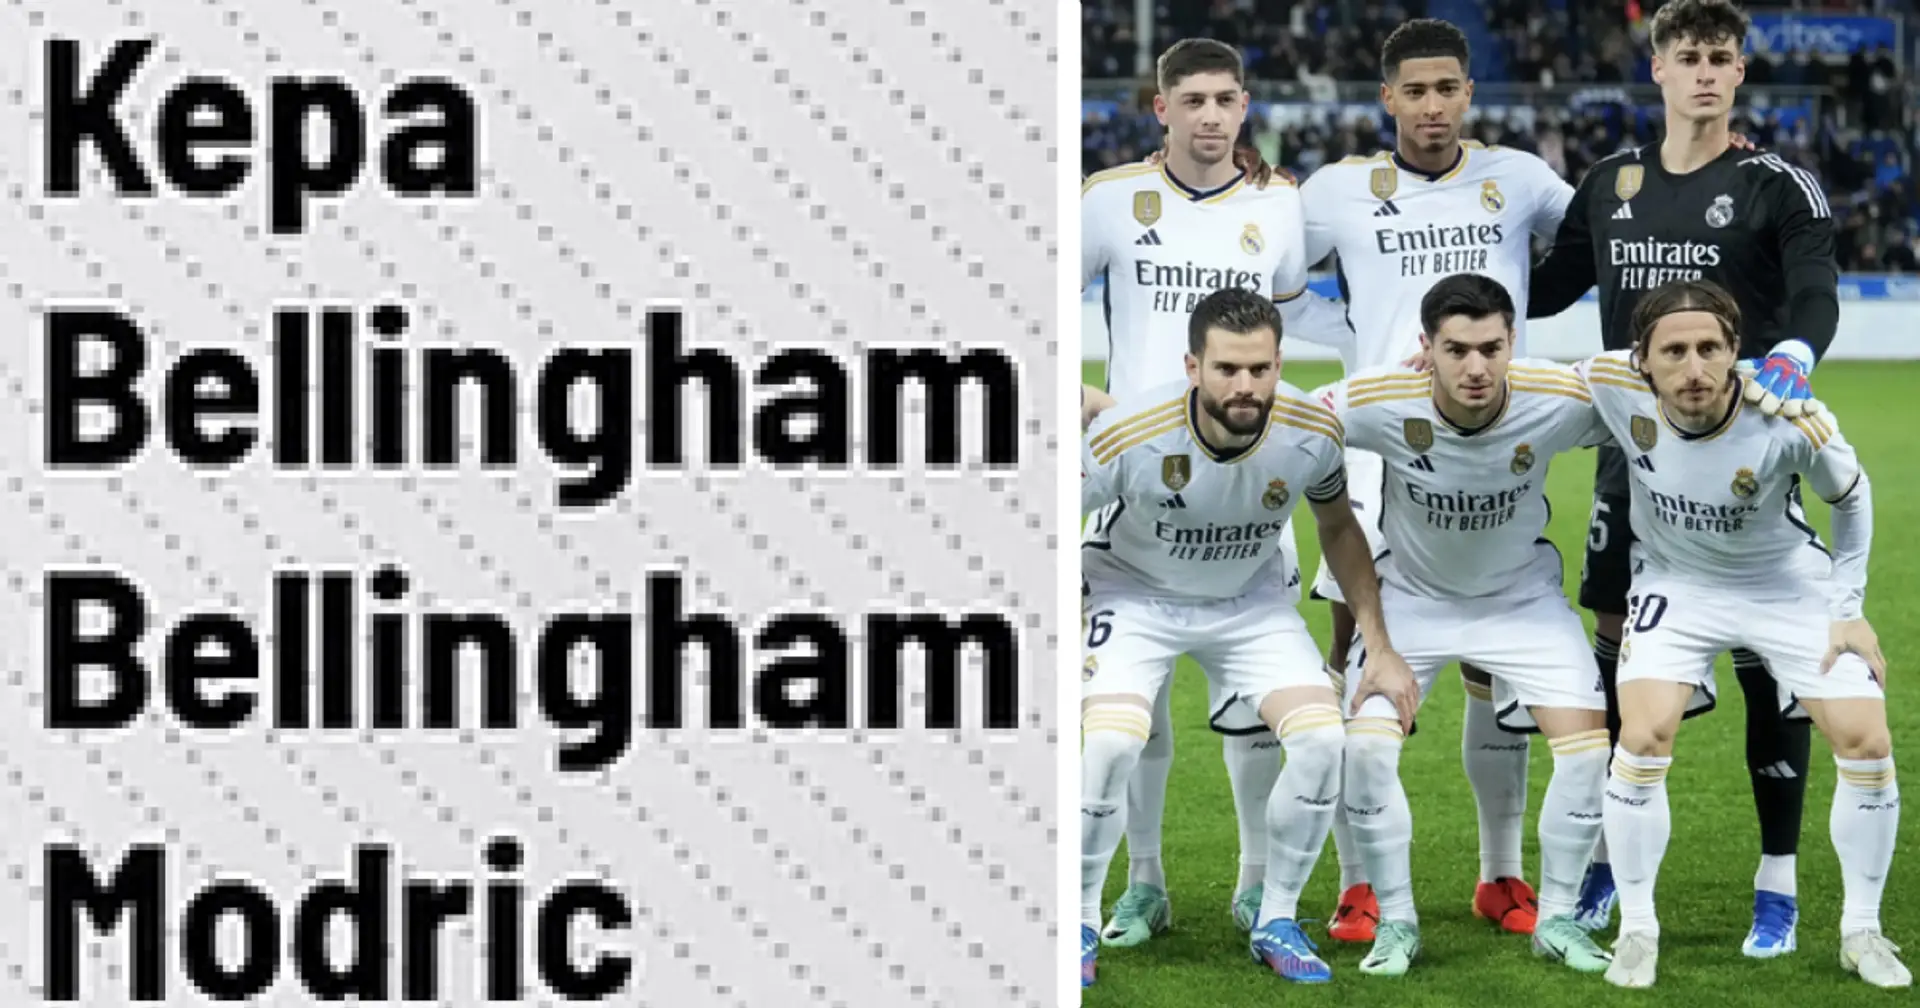 Real Madrid's Copa del Rey opposition send list of jerseys they'd like to get – Bellingham NOT most wanted